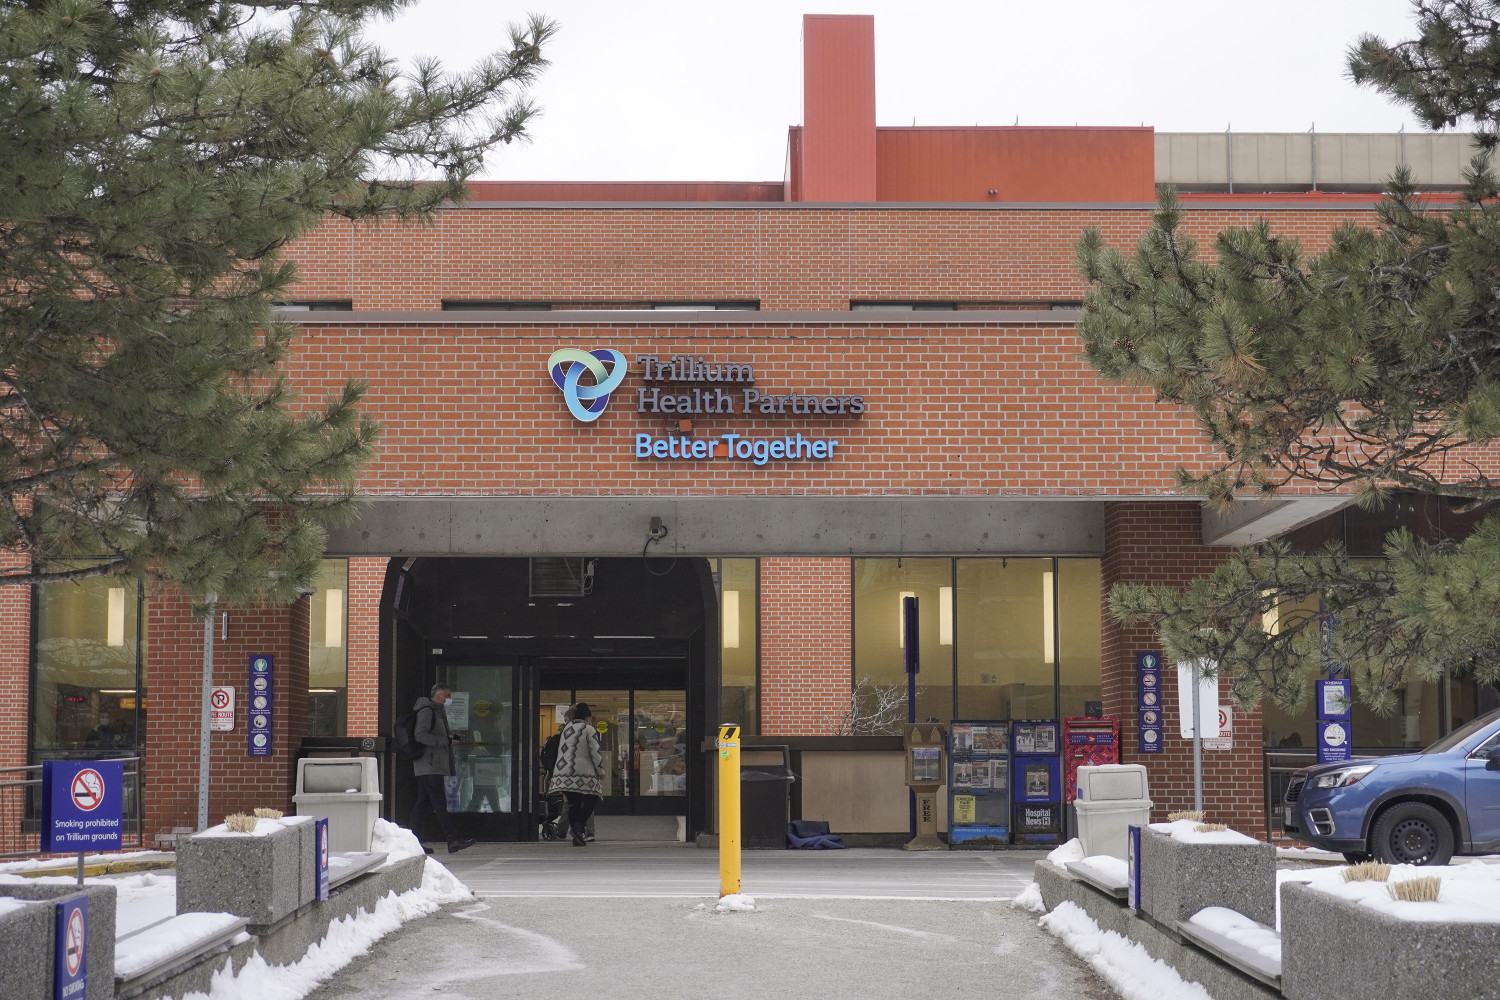 Inspector calls for culture change at Mississauga’s Trillium Health Partners following complaints of intimidation, abuse of power by senior leadership